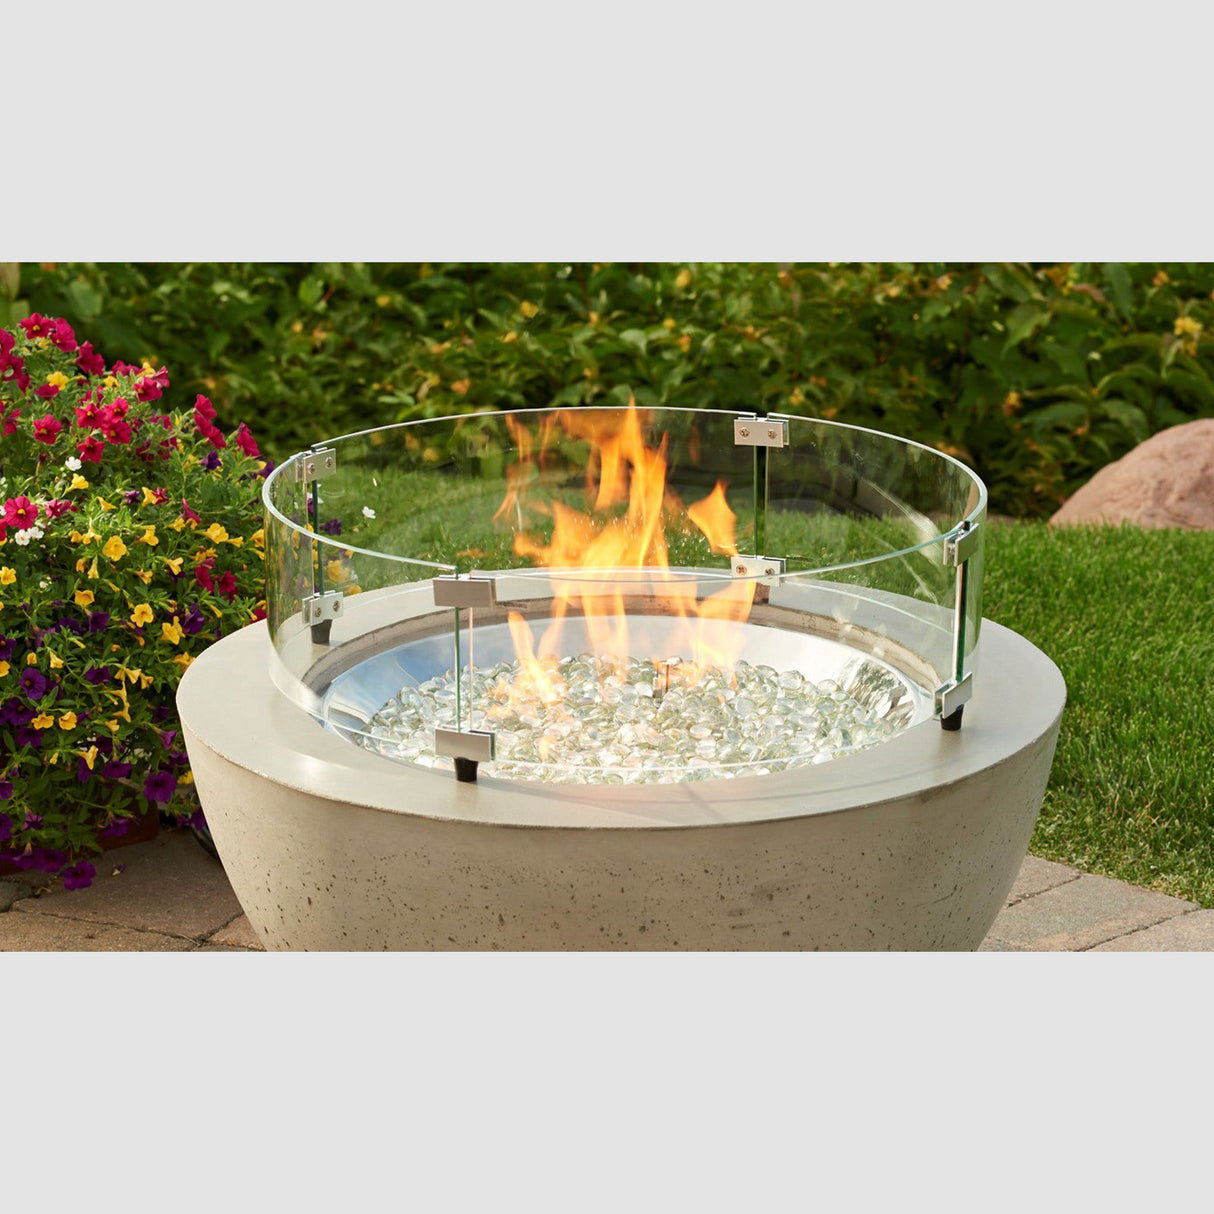 The Round Glass Wind Guard used to protect a flame from the fire pit bowl in a patio setting